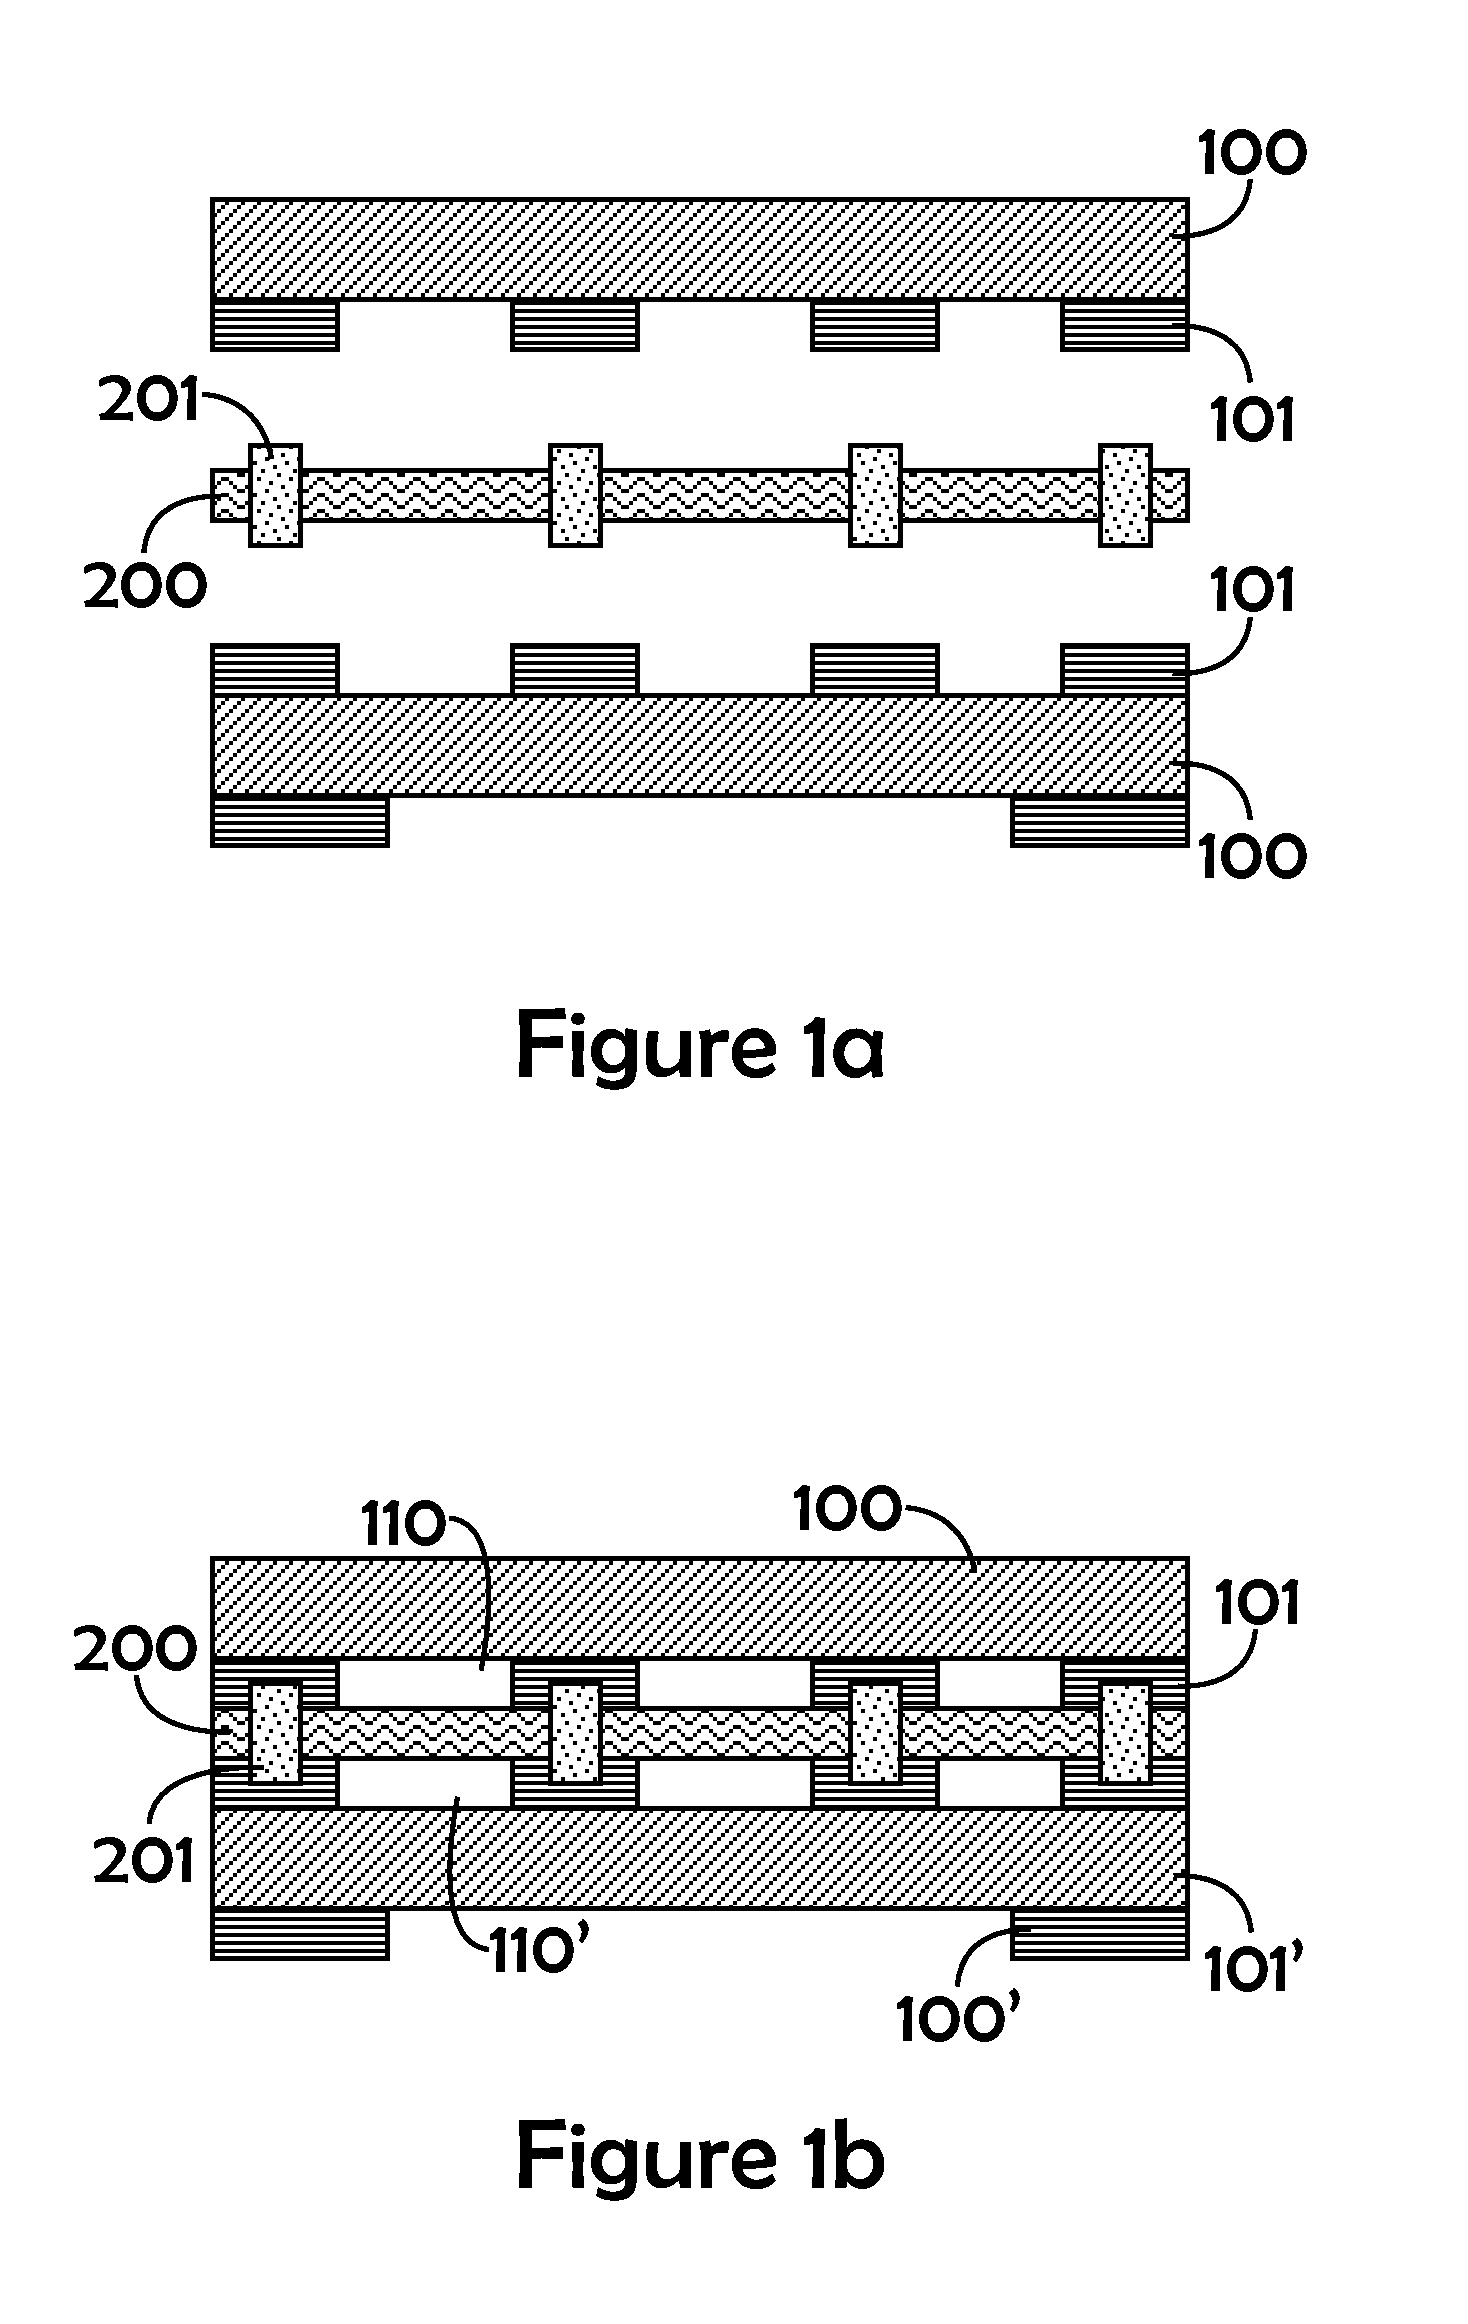 Conducting paste for device level interconnects